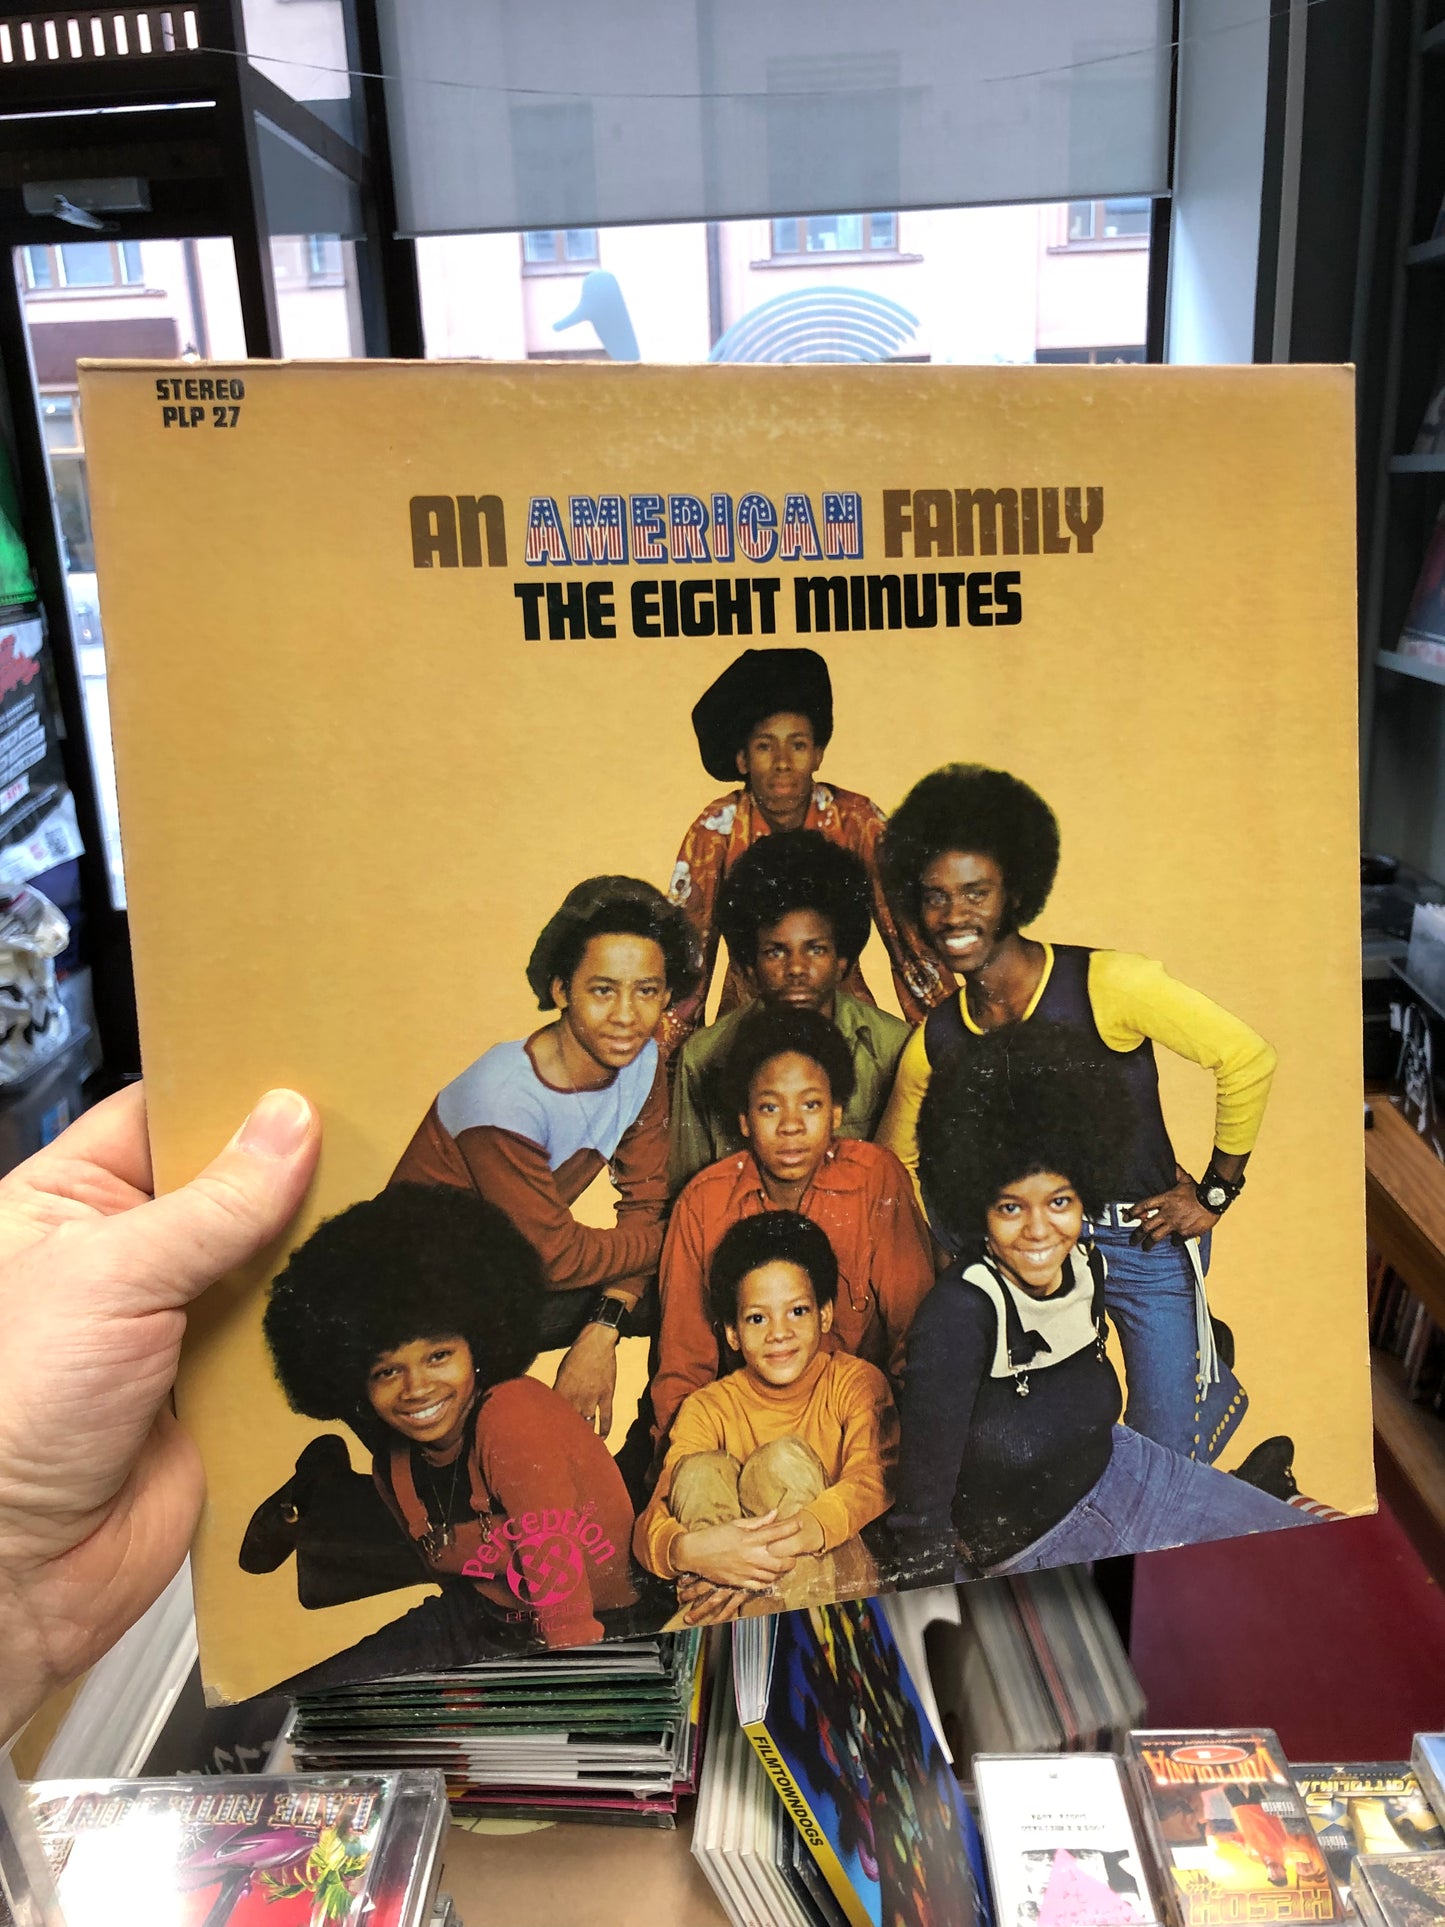 The Eight Minutes: An American Family, 1st pressing, US 1972, Perception Records.